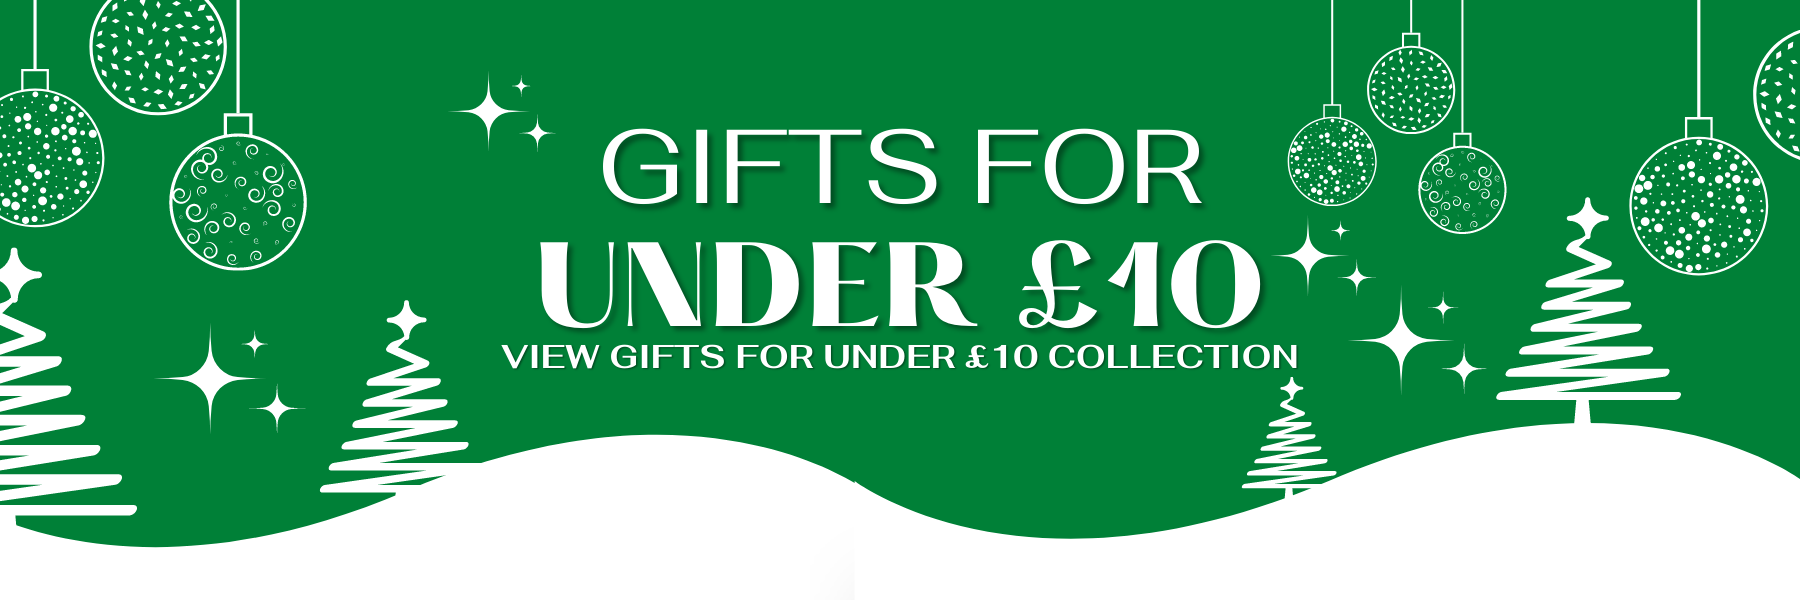 Christmas Gifts For Under £10 | Total-Hockey